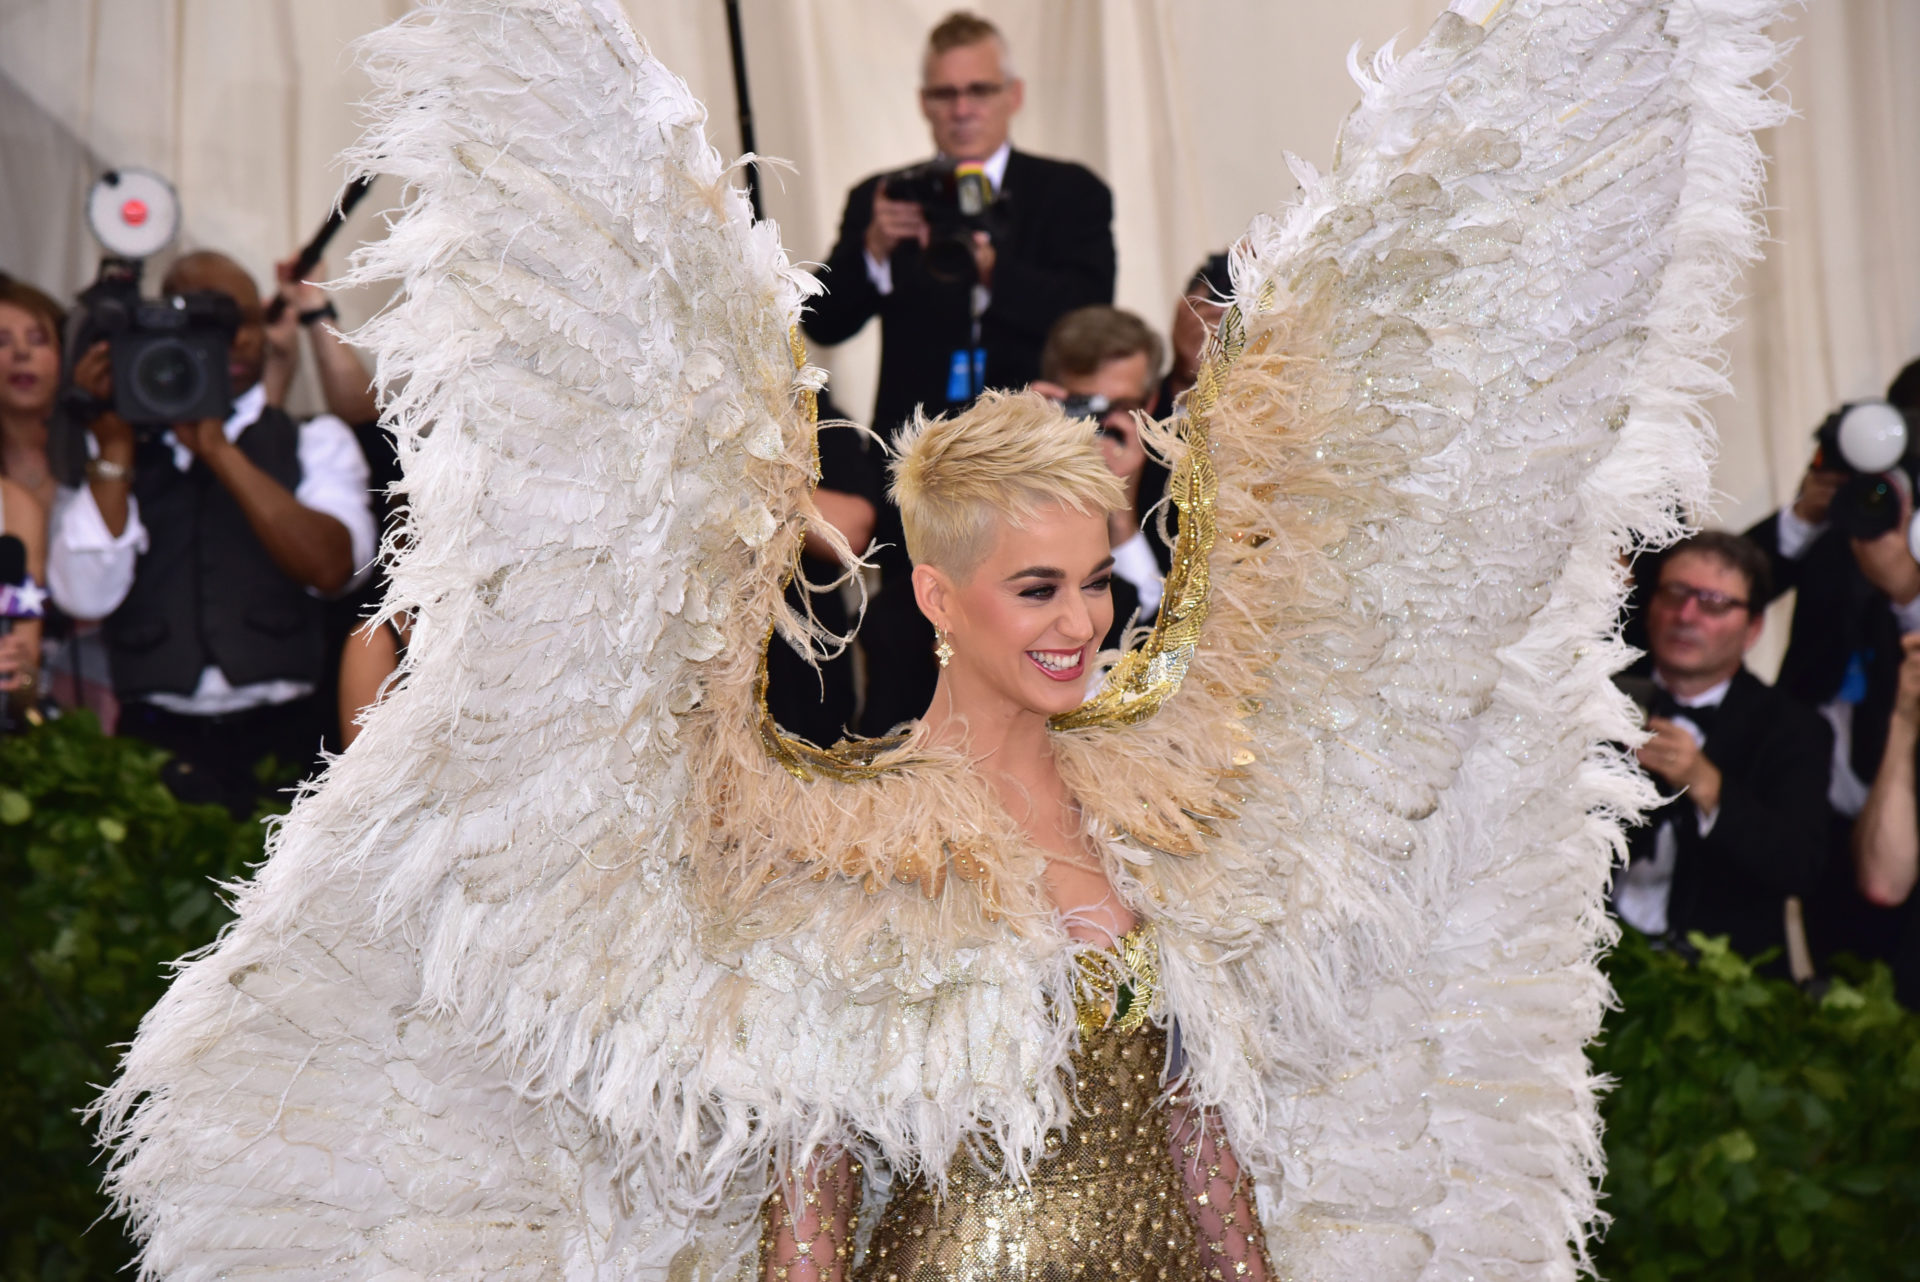 An Art-Critical Ranking of the Top 11 Looks From This Year’s Met Gala